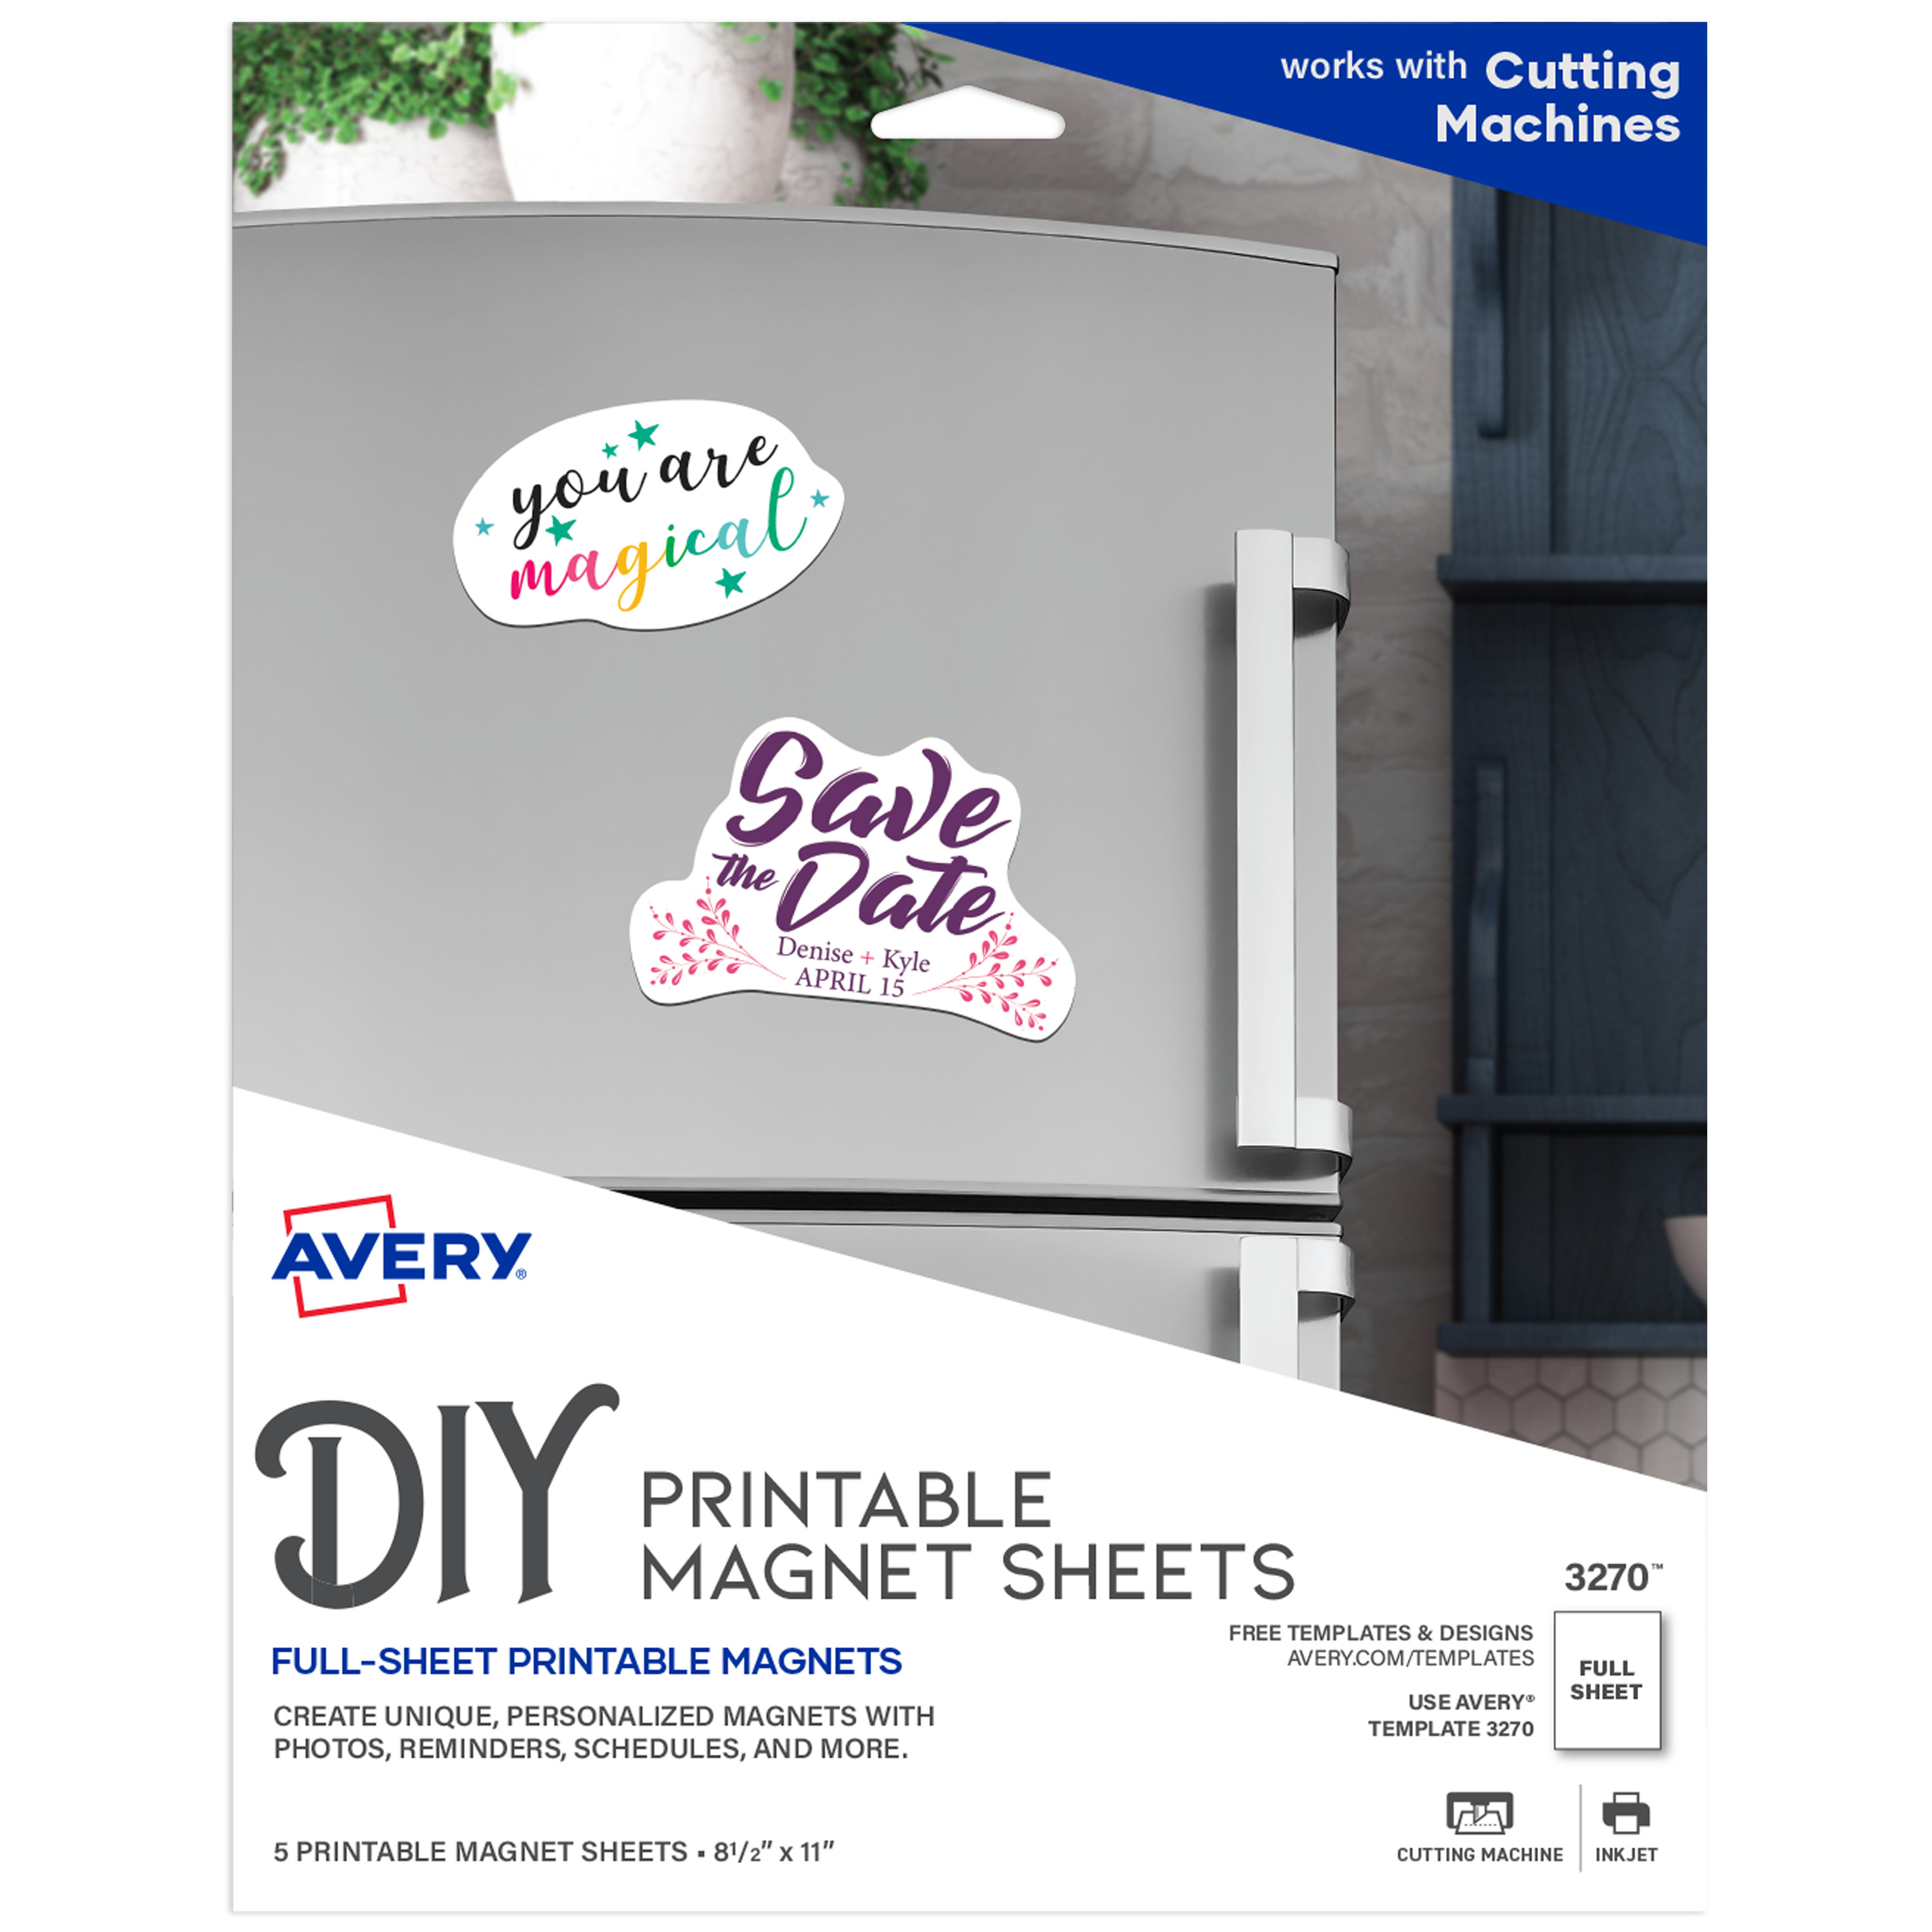 Avery Printable Magnet Sheets, 8.5" x 11", 5 Sheets (3270) - image 1 of 7